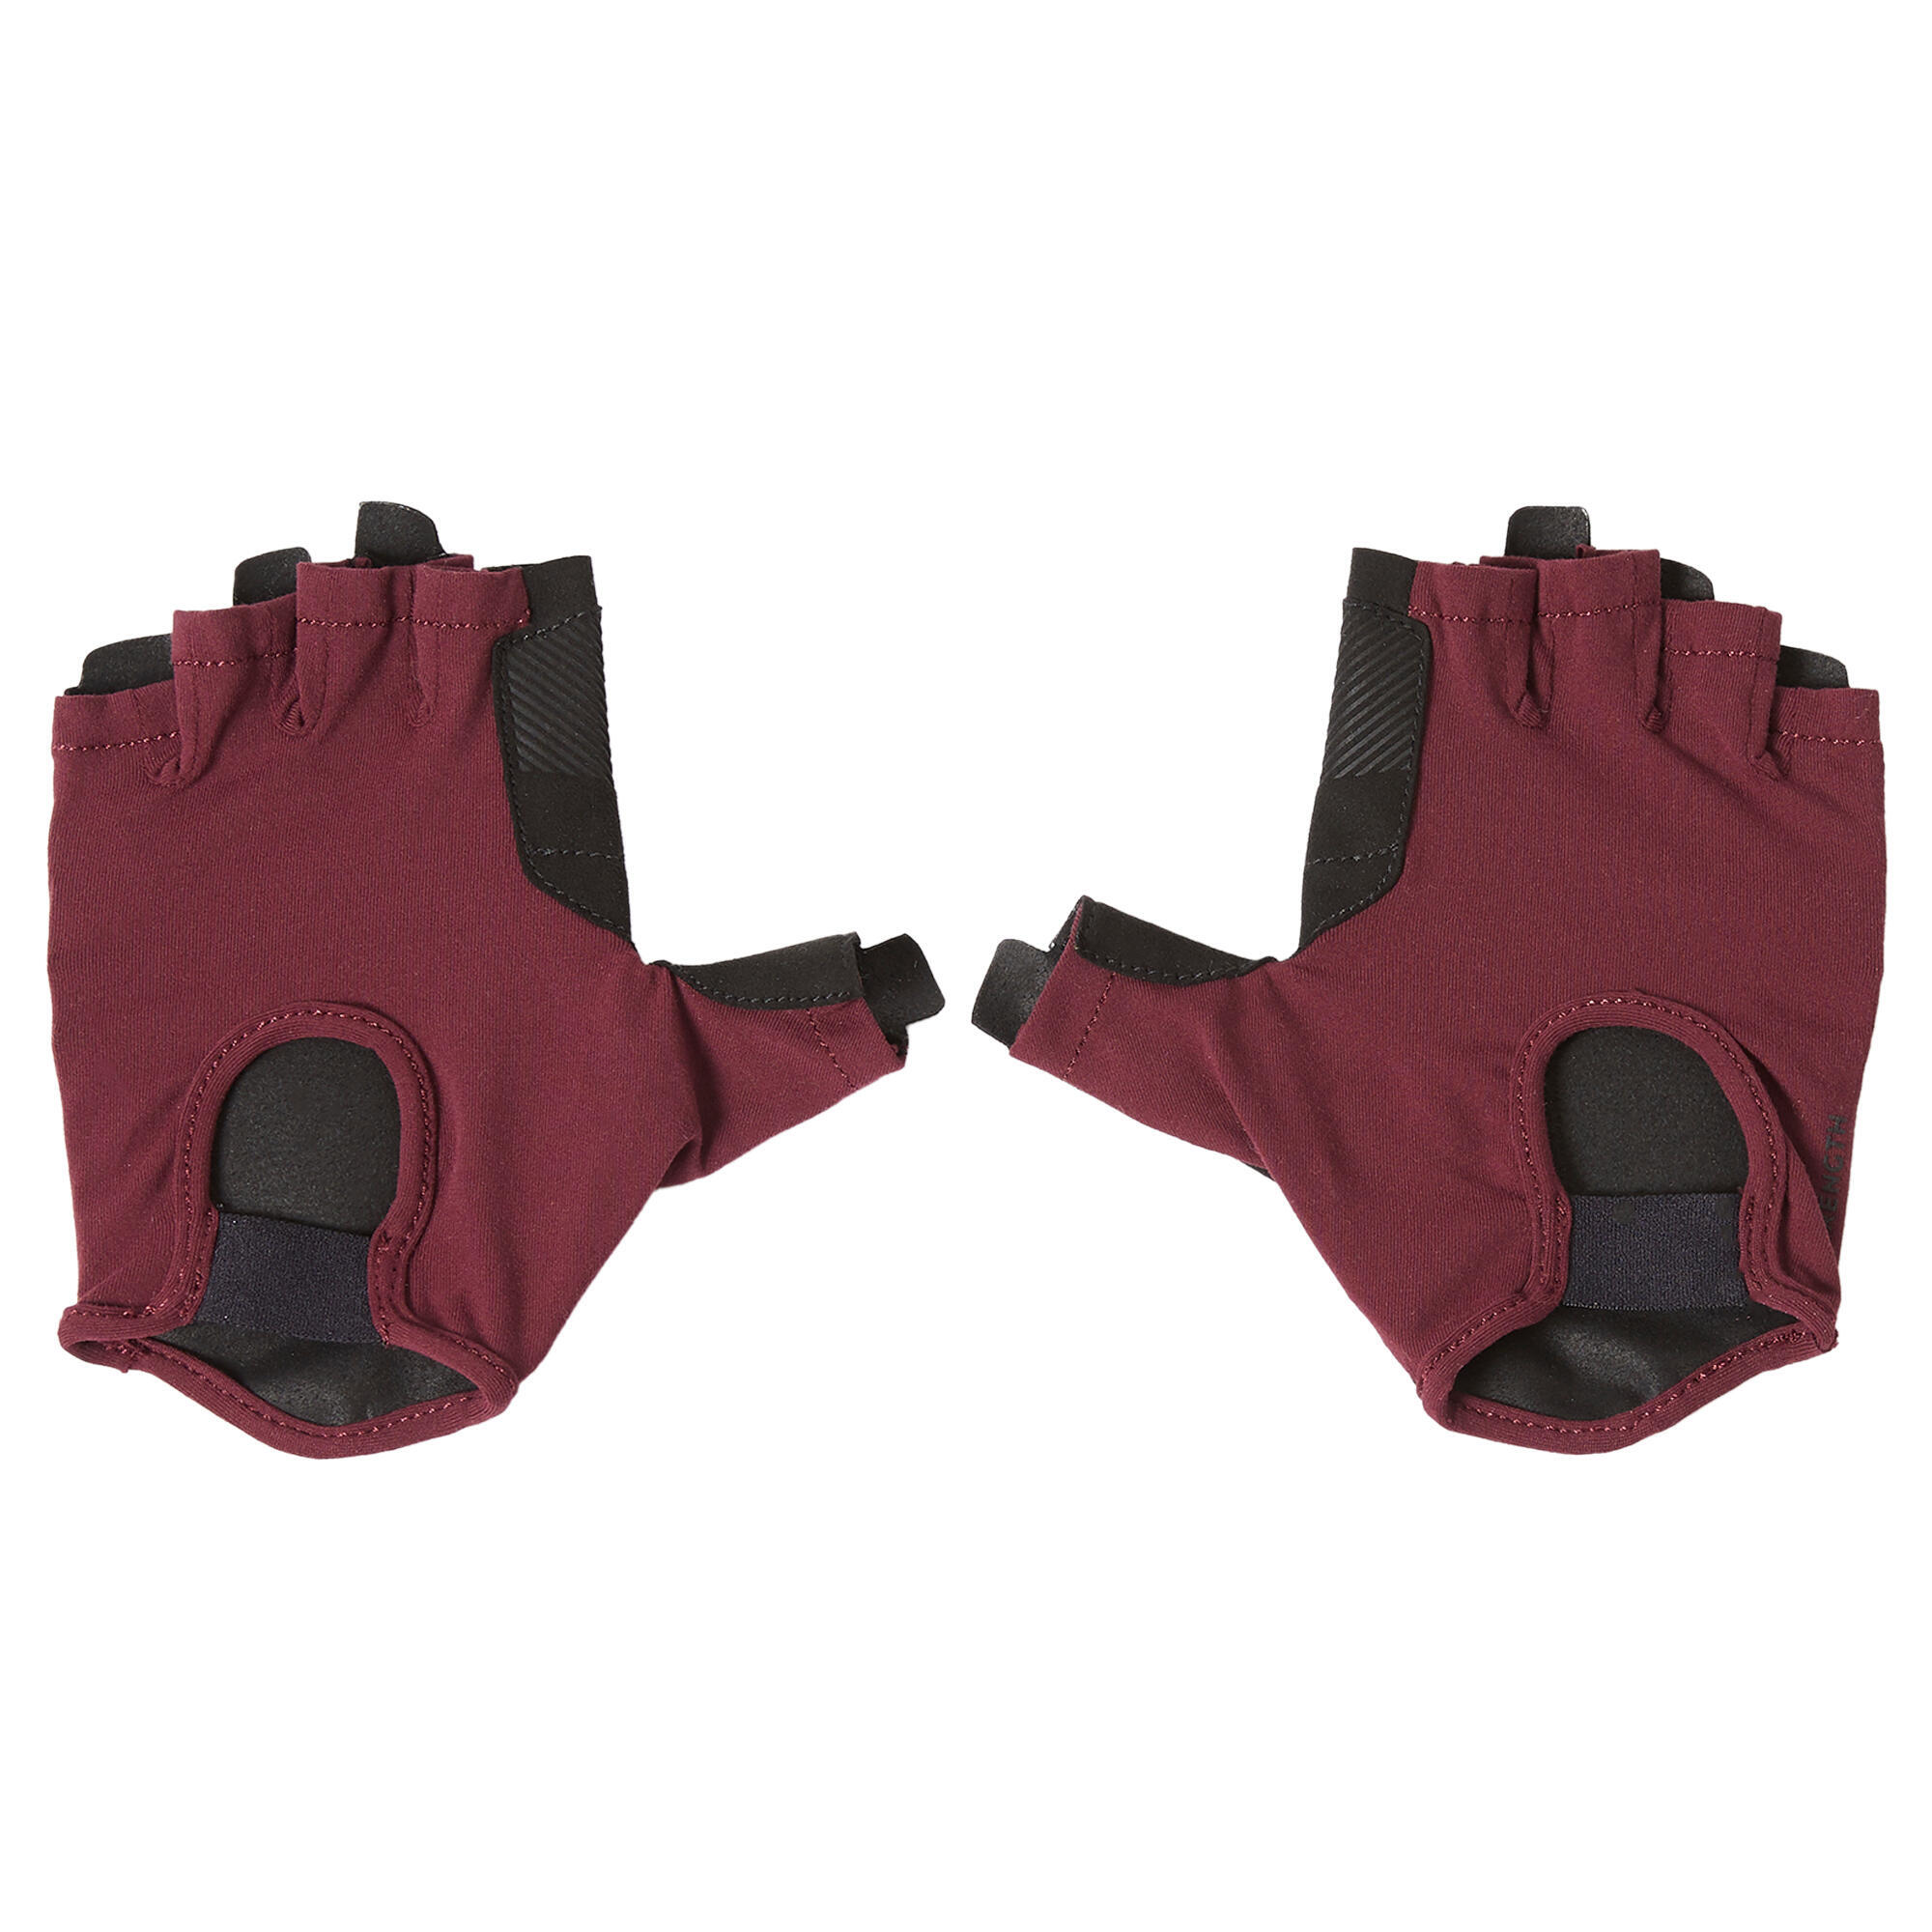 Women's Breathable Weight Training Gloves - Burgundy 1/4